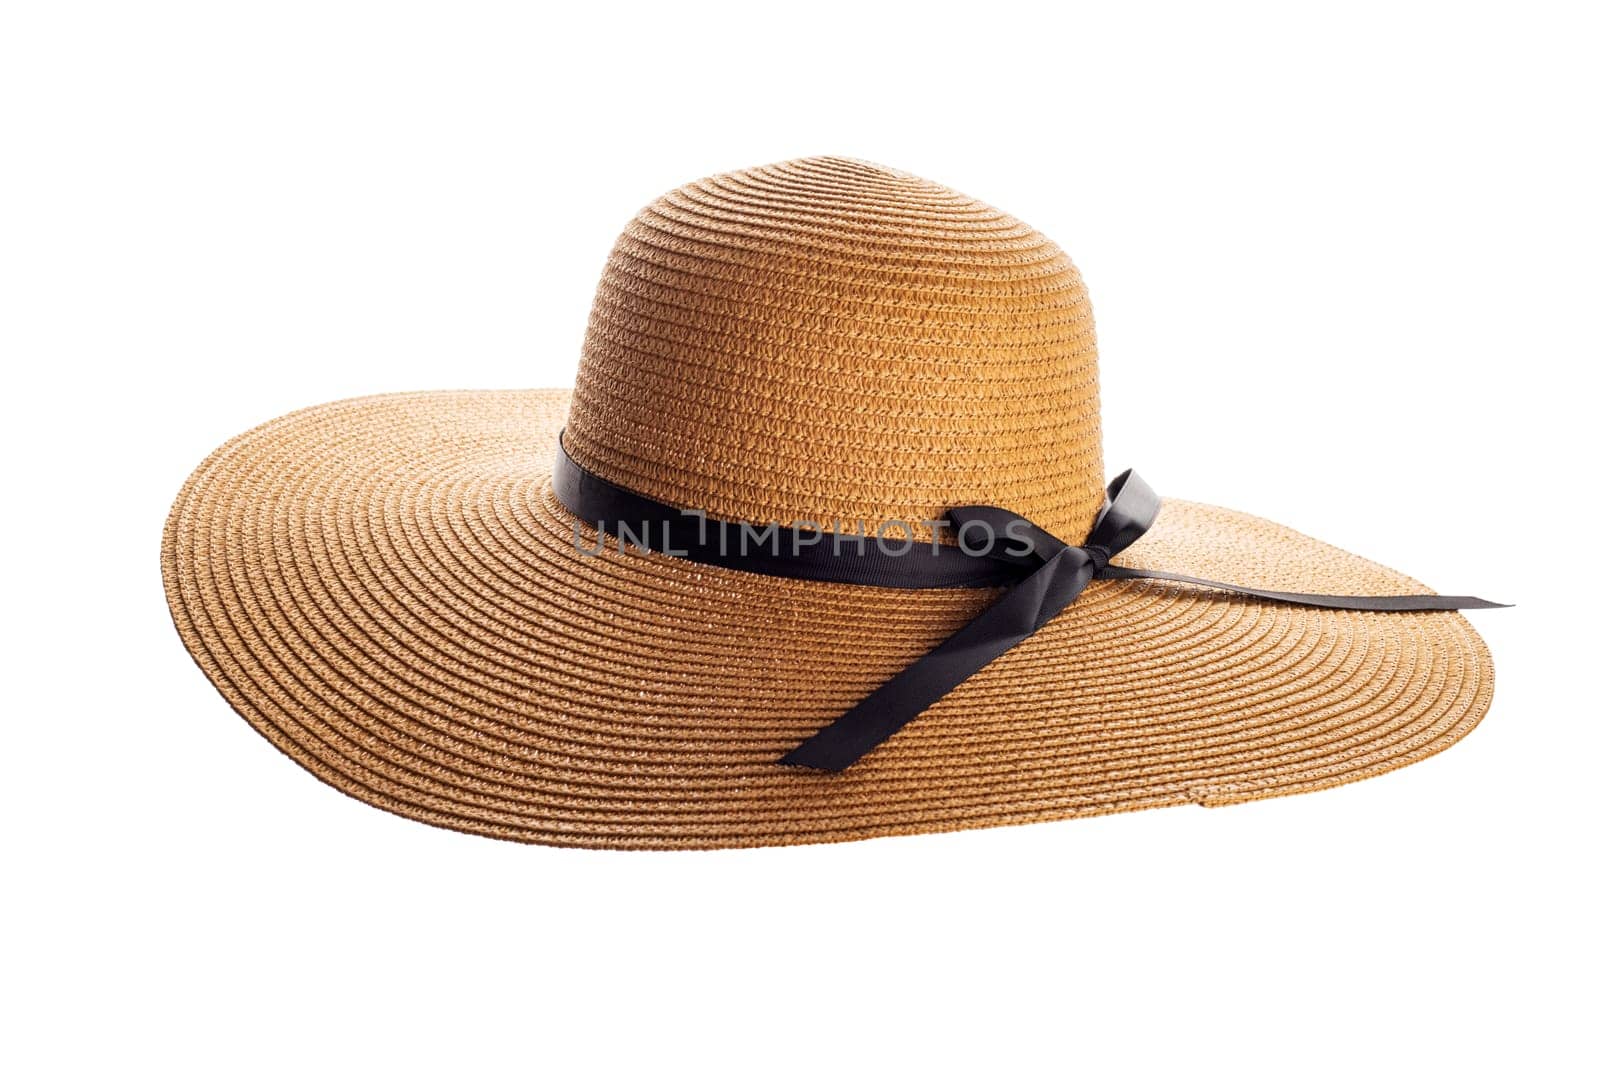 Womens summer yellow straw hat with black ribbon, isolated on white background.